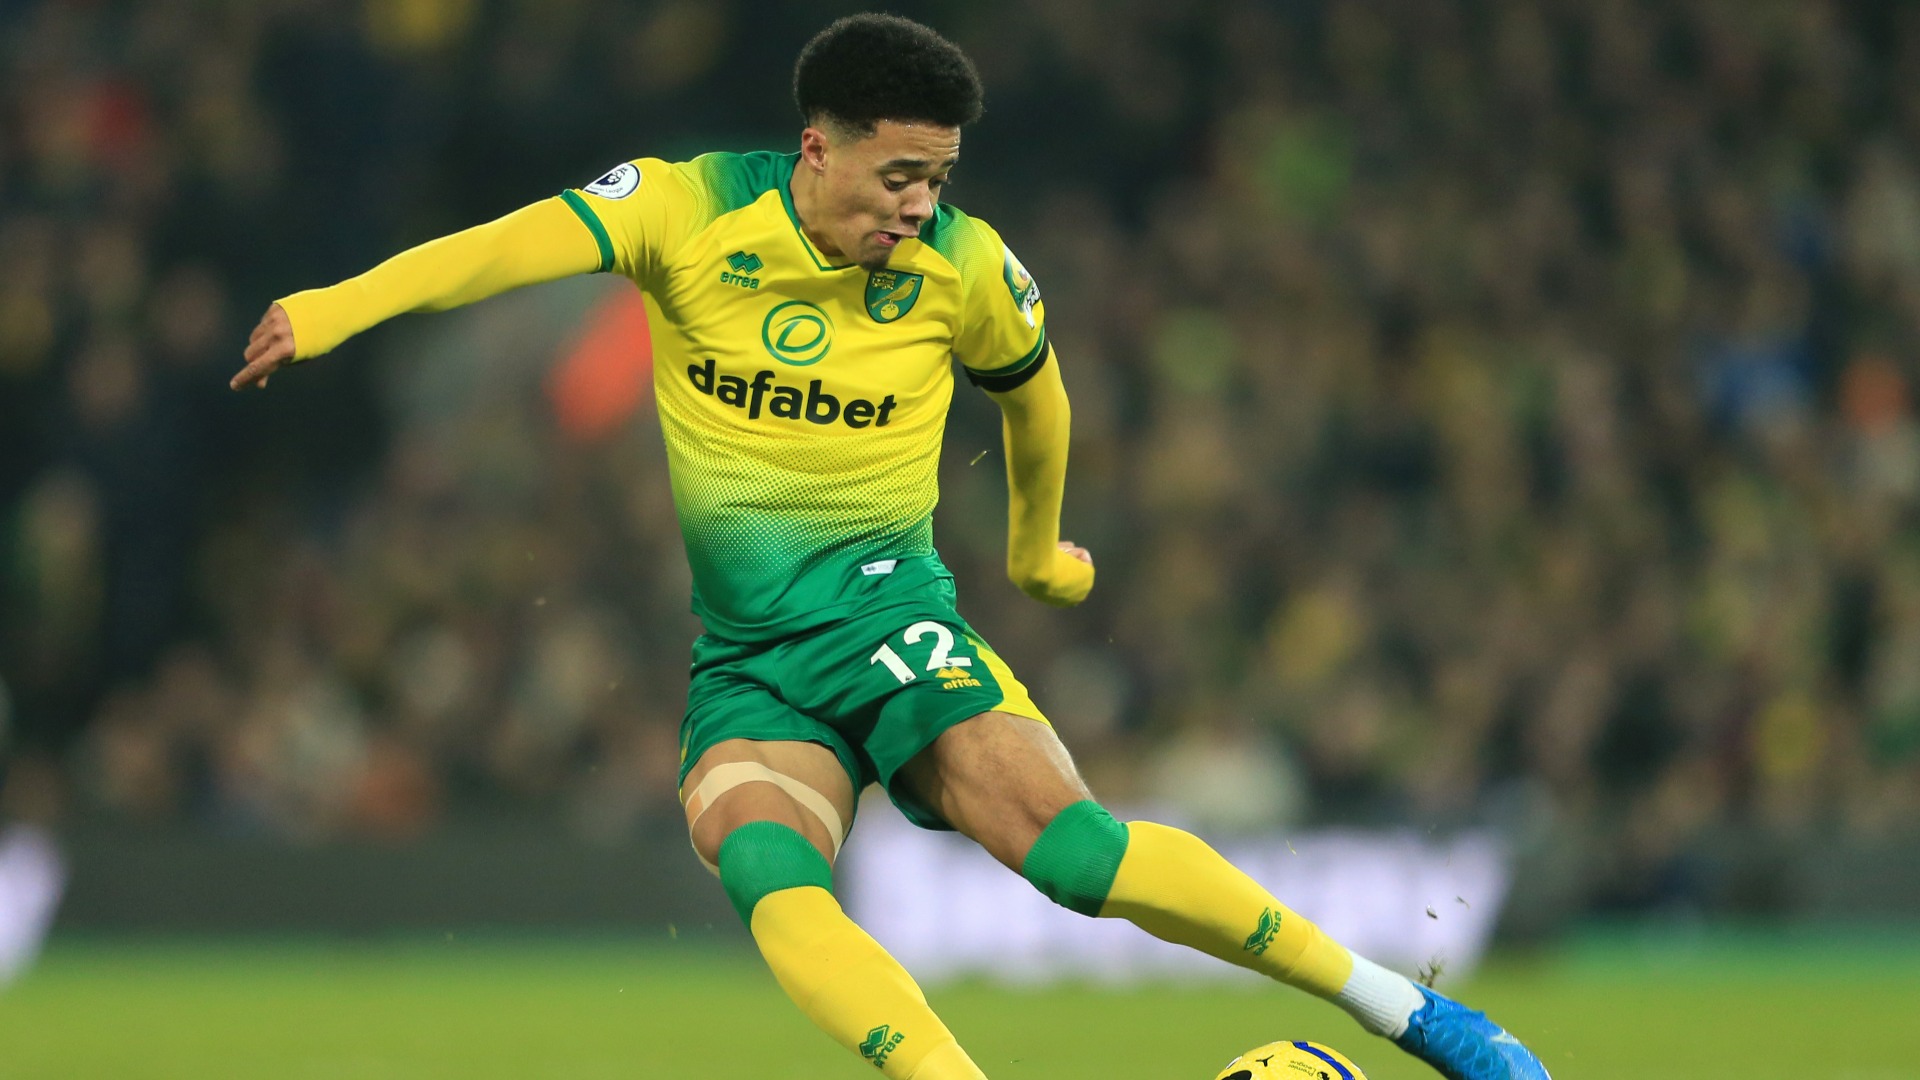 Norwich City survived a tricky first hour to upset high-flying Leicester City thanks to a fine Jamal Lewis goal at Carrow Road.